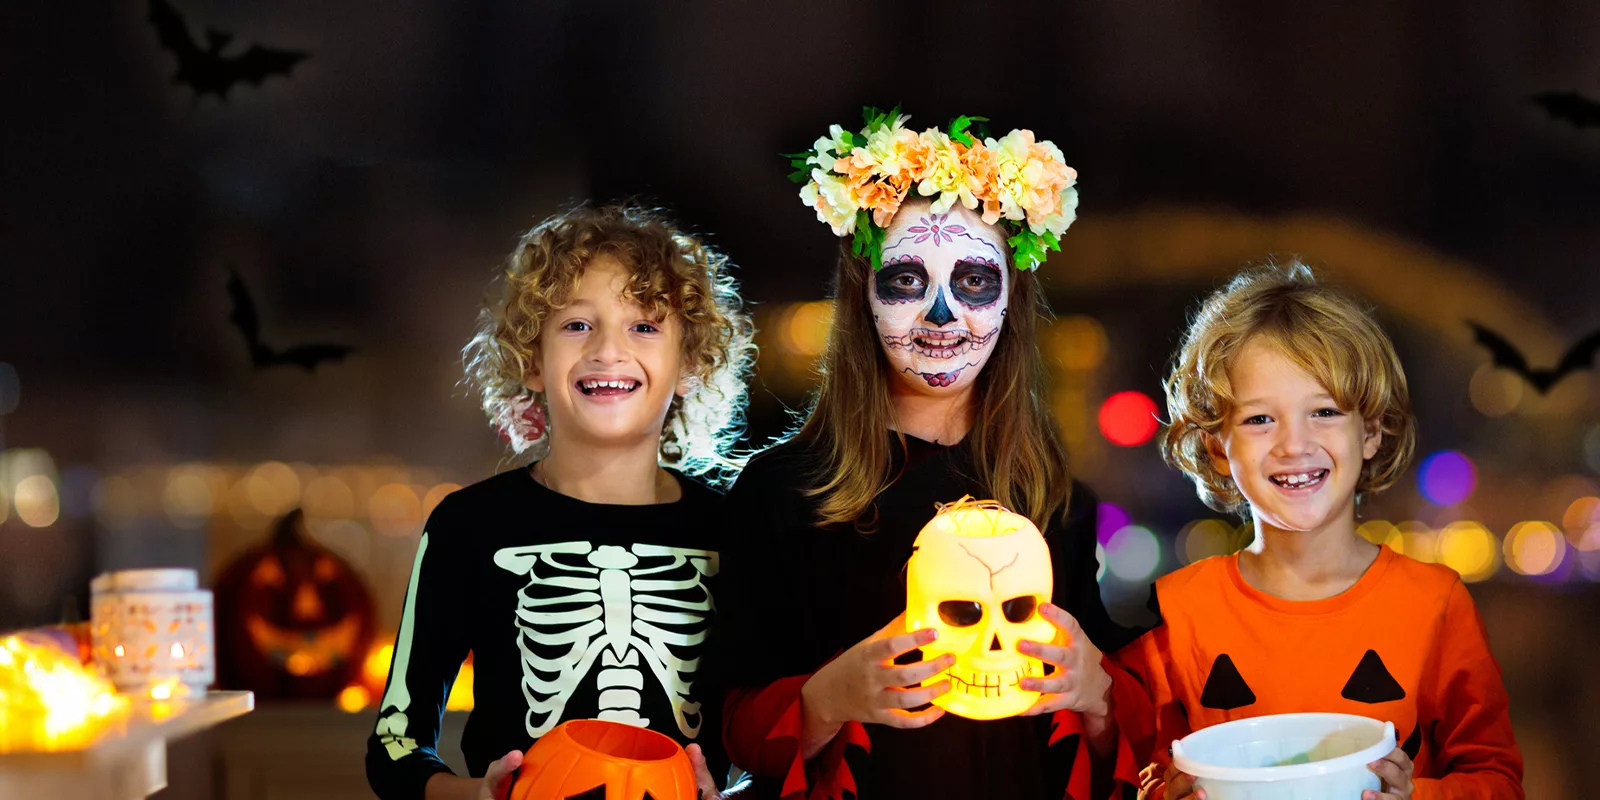 children wearing halloween costumes smile and hold spooky decorations